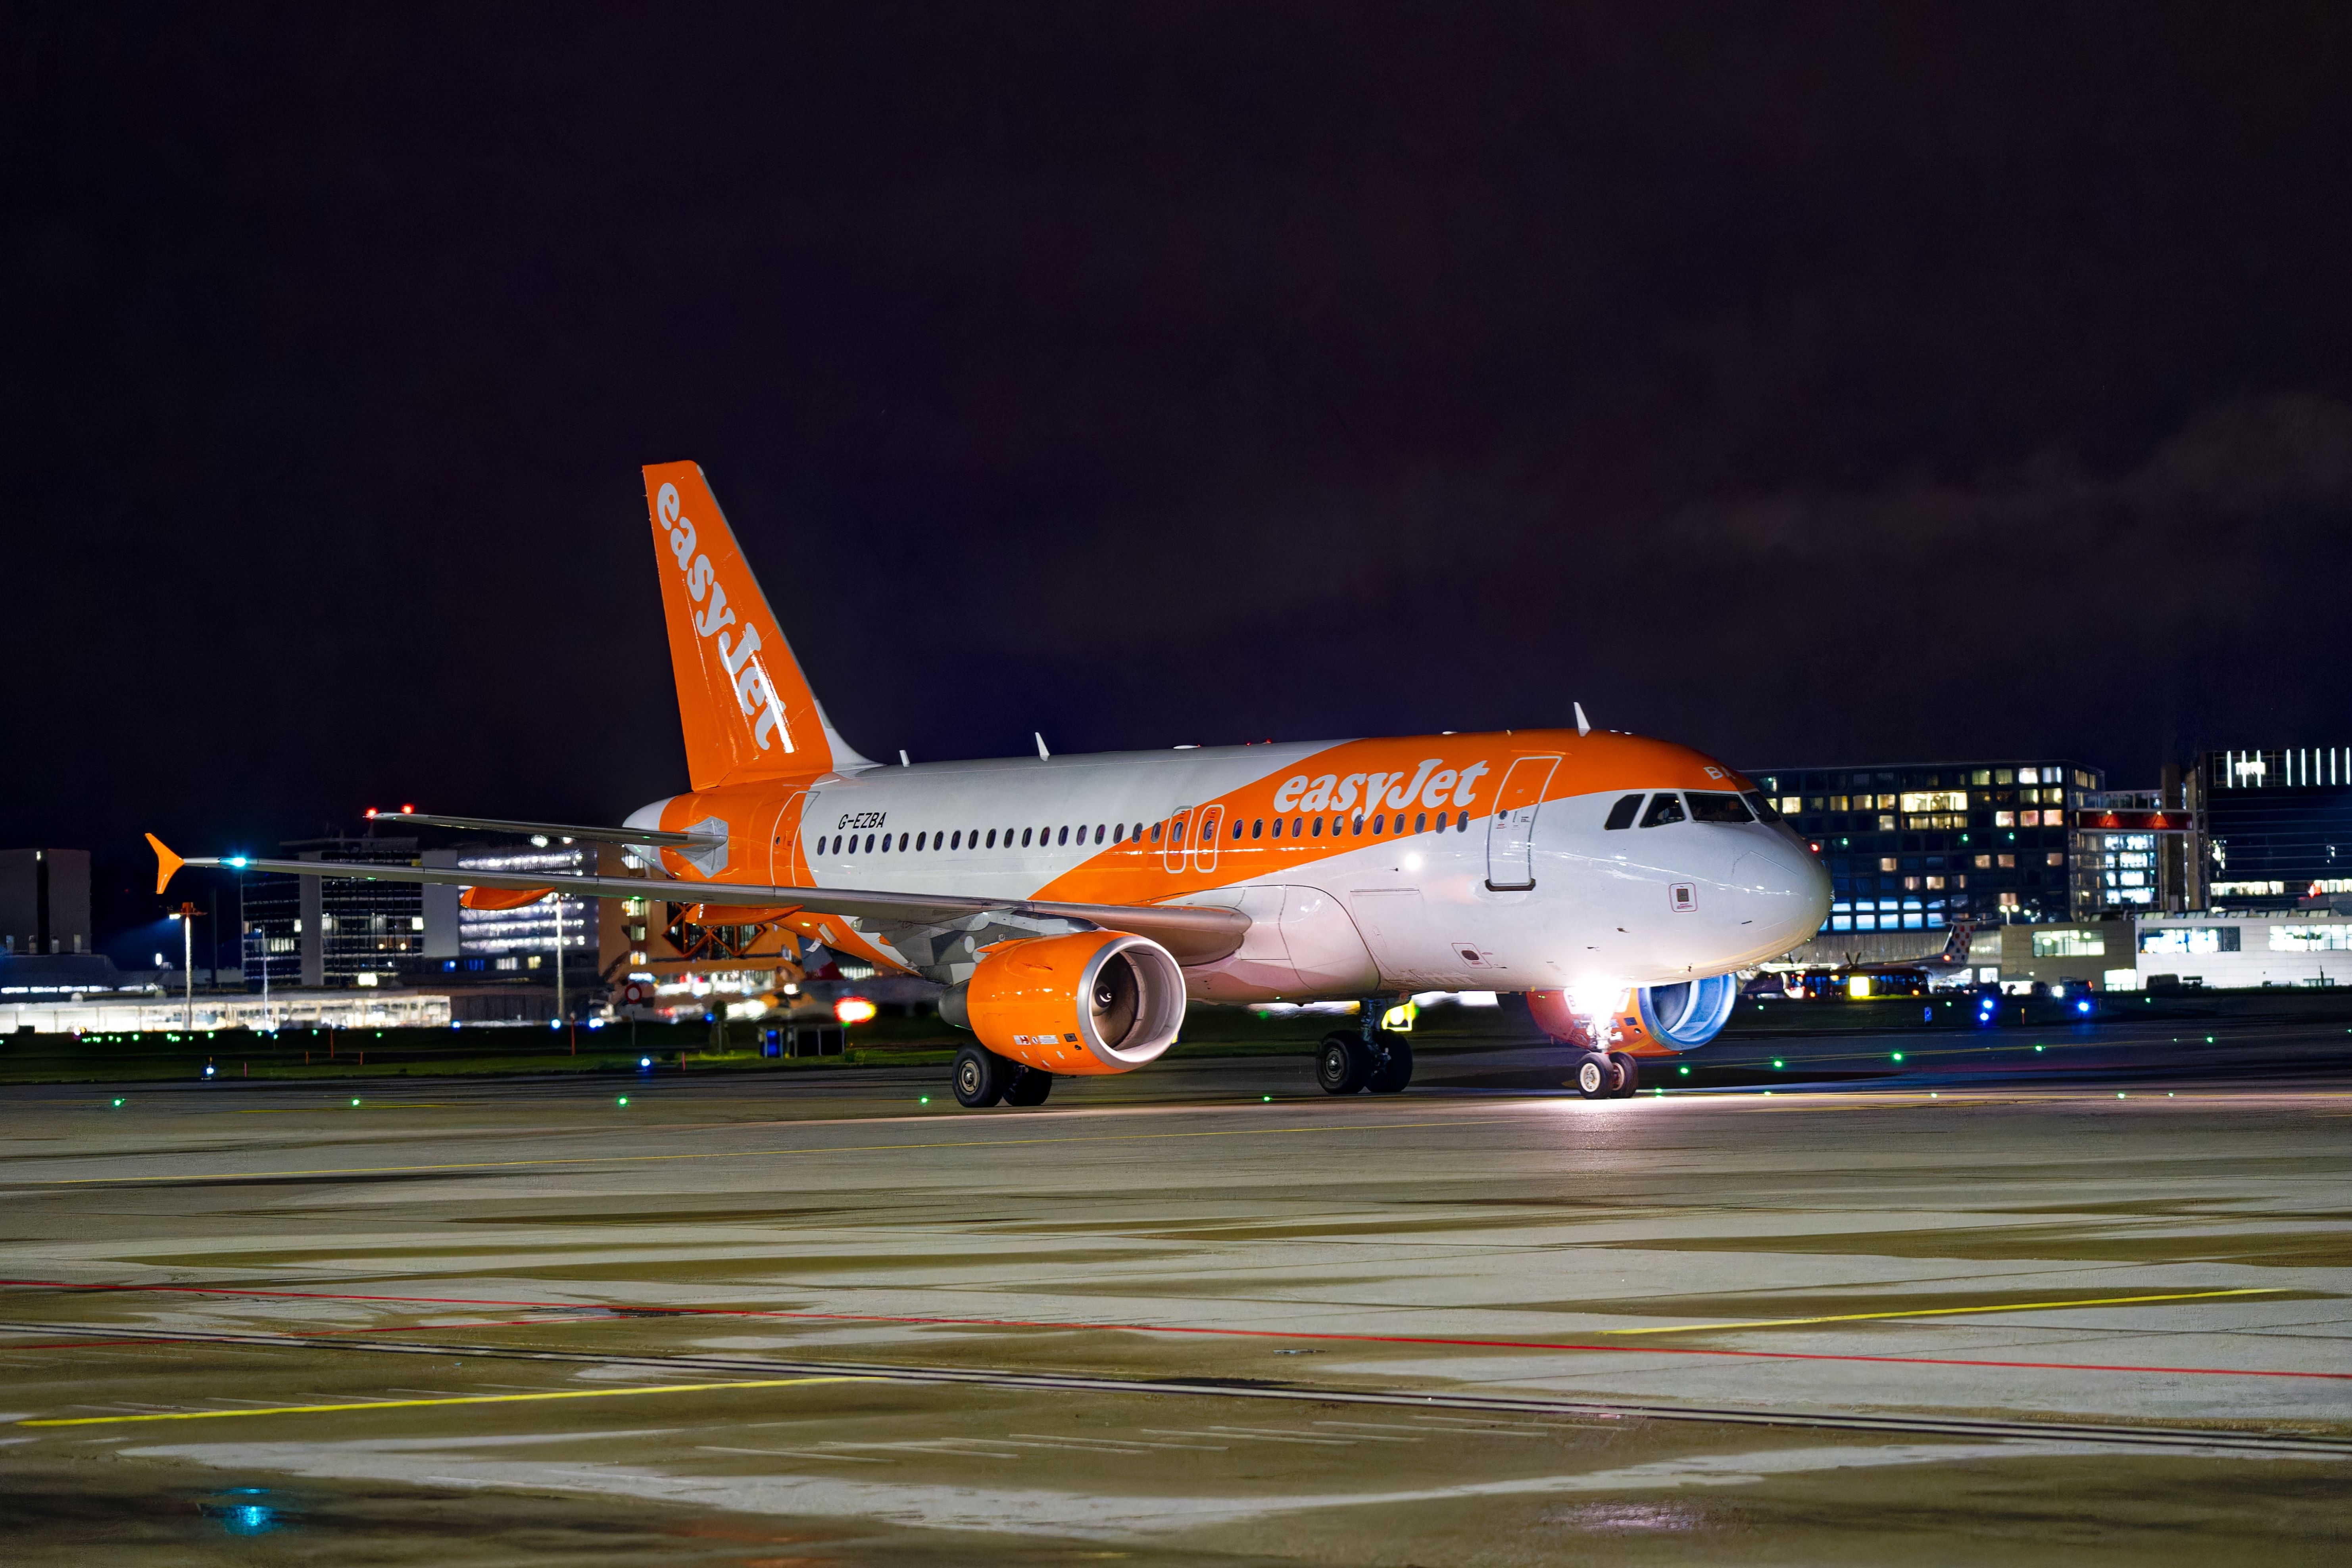 An easyJet Airbus A319 on an airport apron.